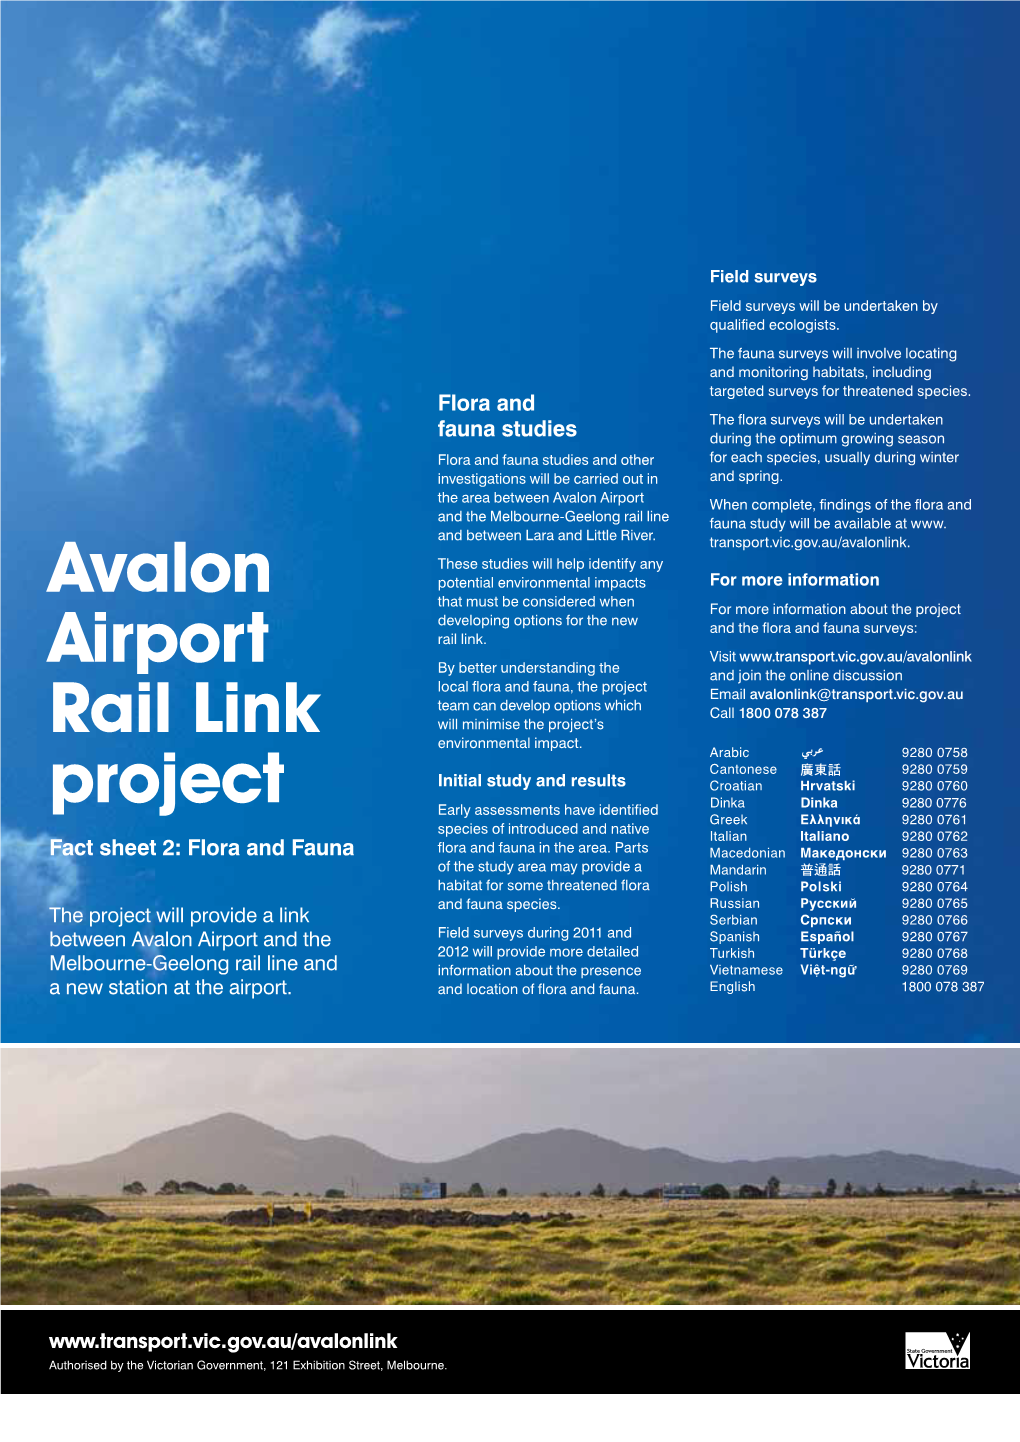 Avalon Airport Rail Link Project Study Area